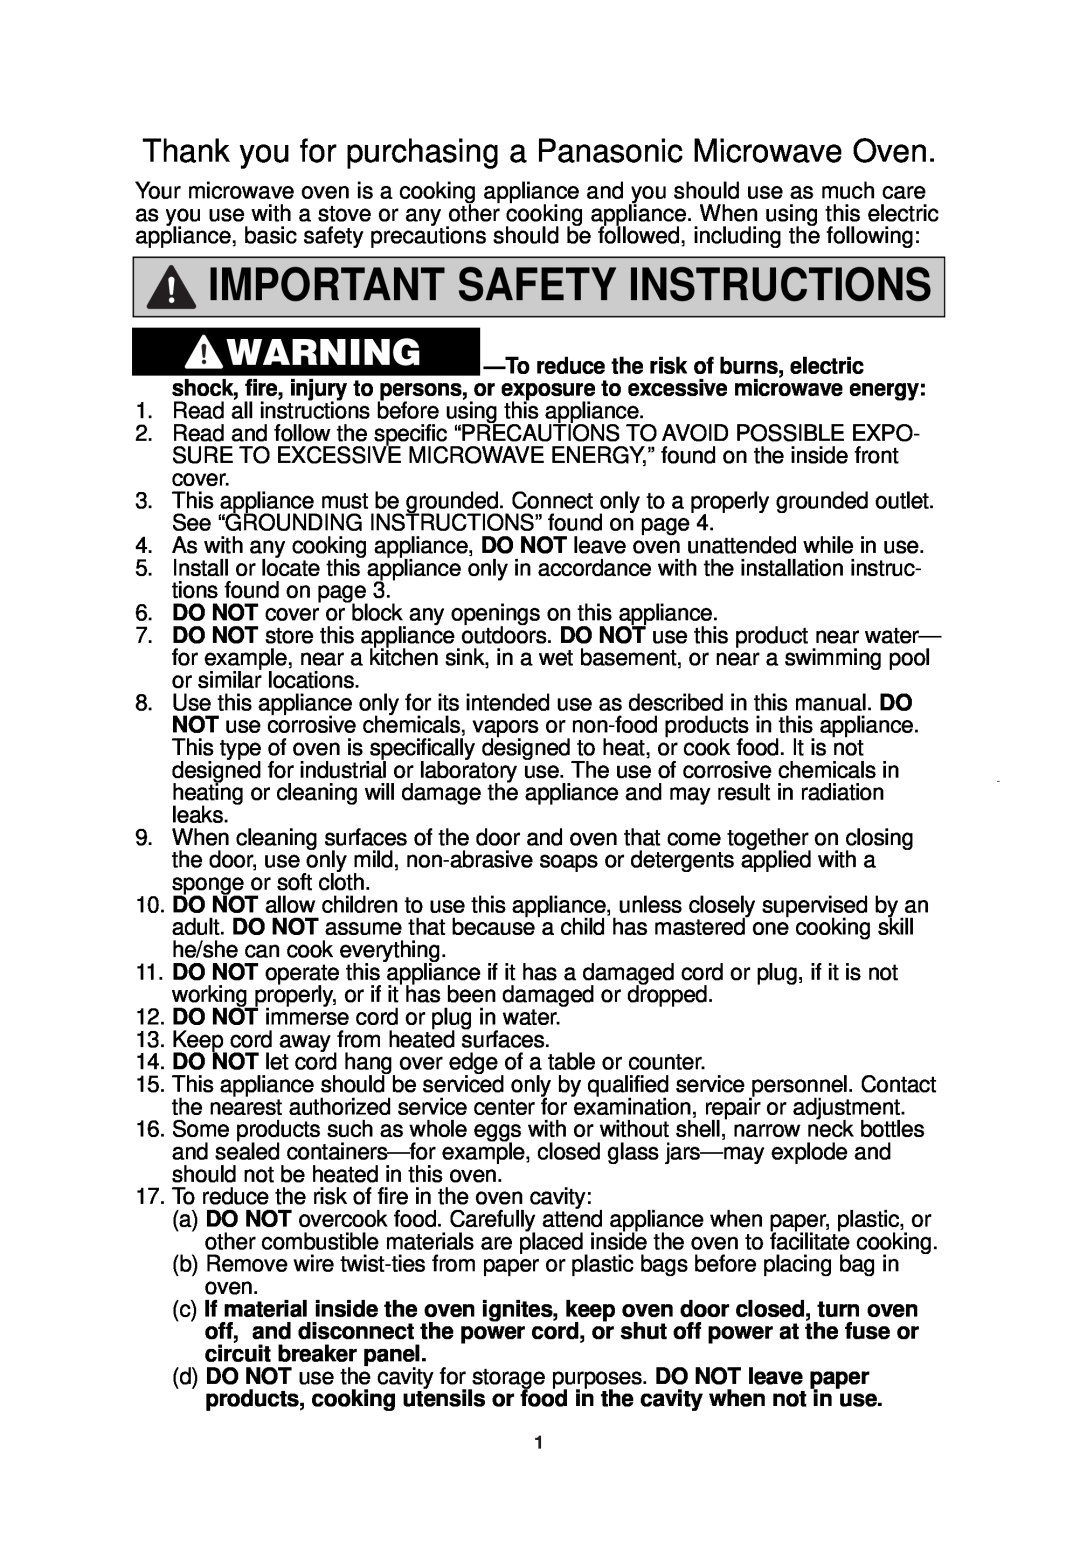 Panasonic NN-SN778 Important Safety Instructions, Thank you for purchasing a Panasonic Microwave Oven 